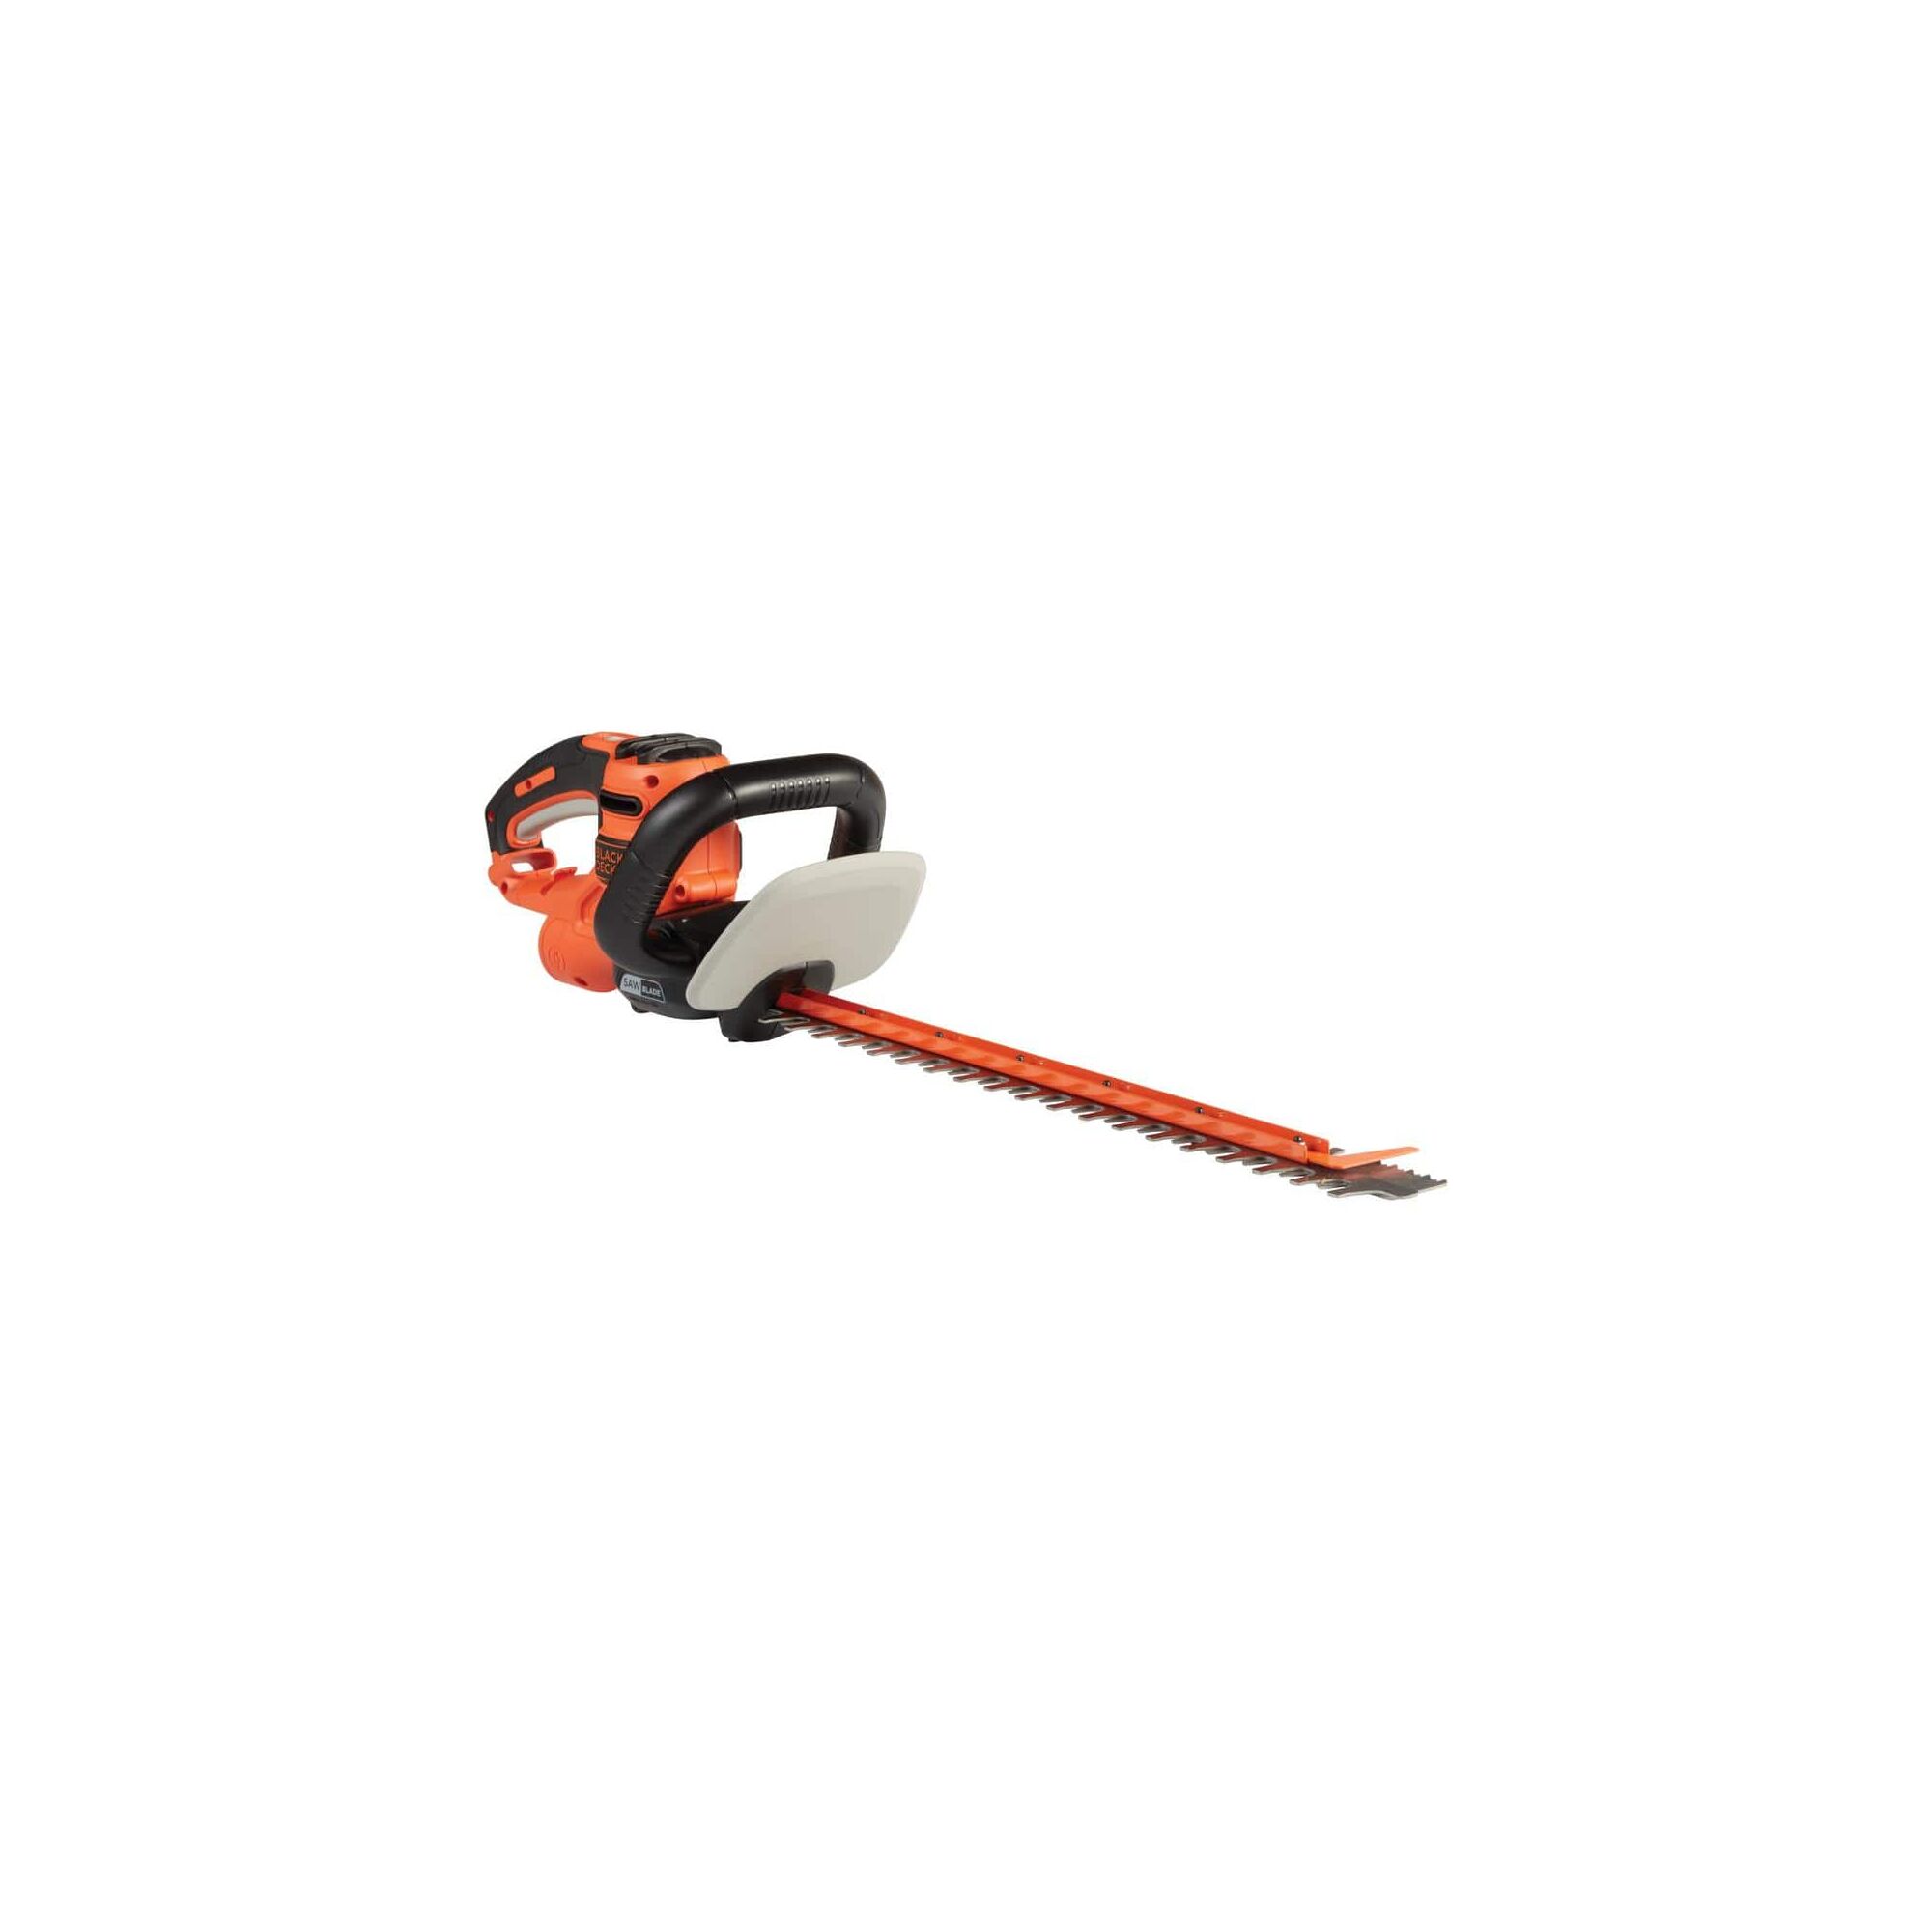 Profile of 20 inch SAWBLADE Electric Hedge Trimmer